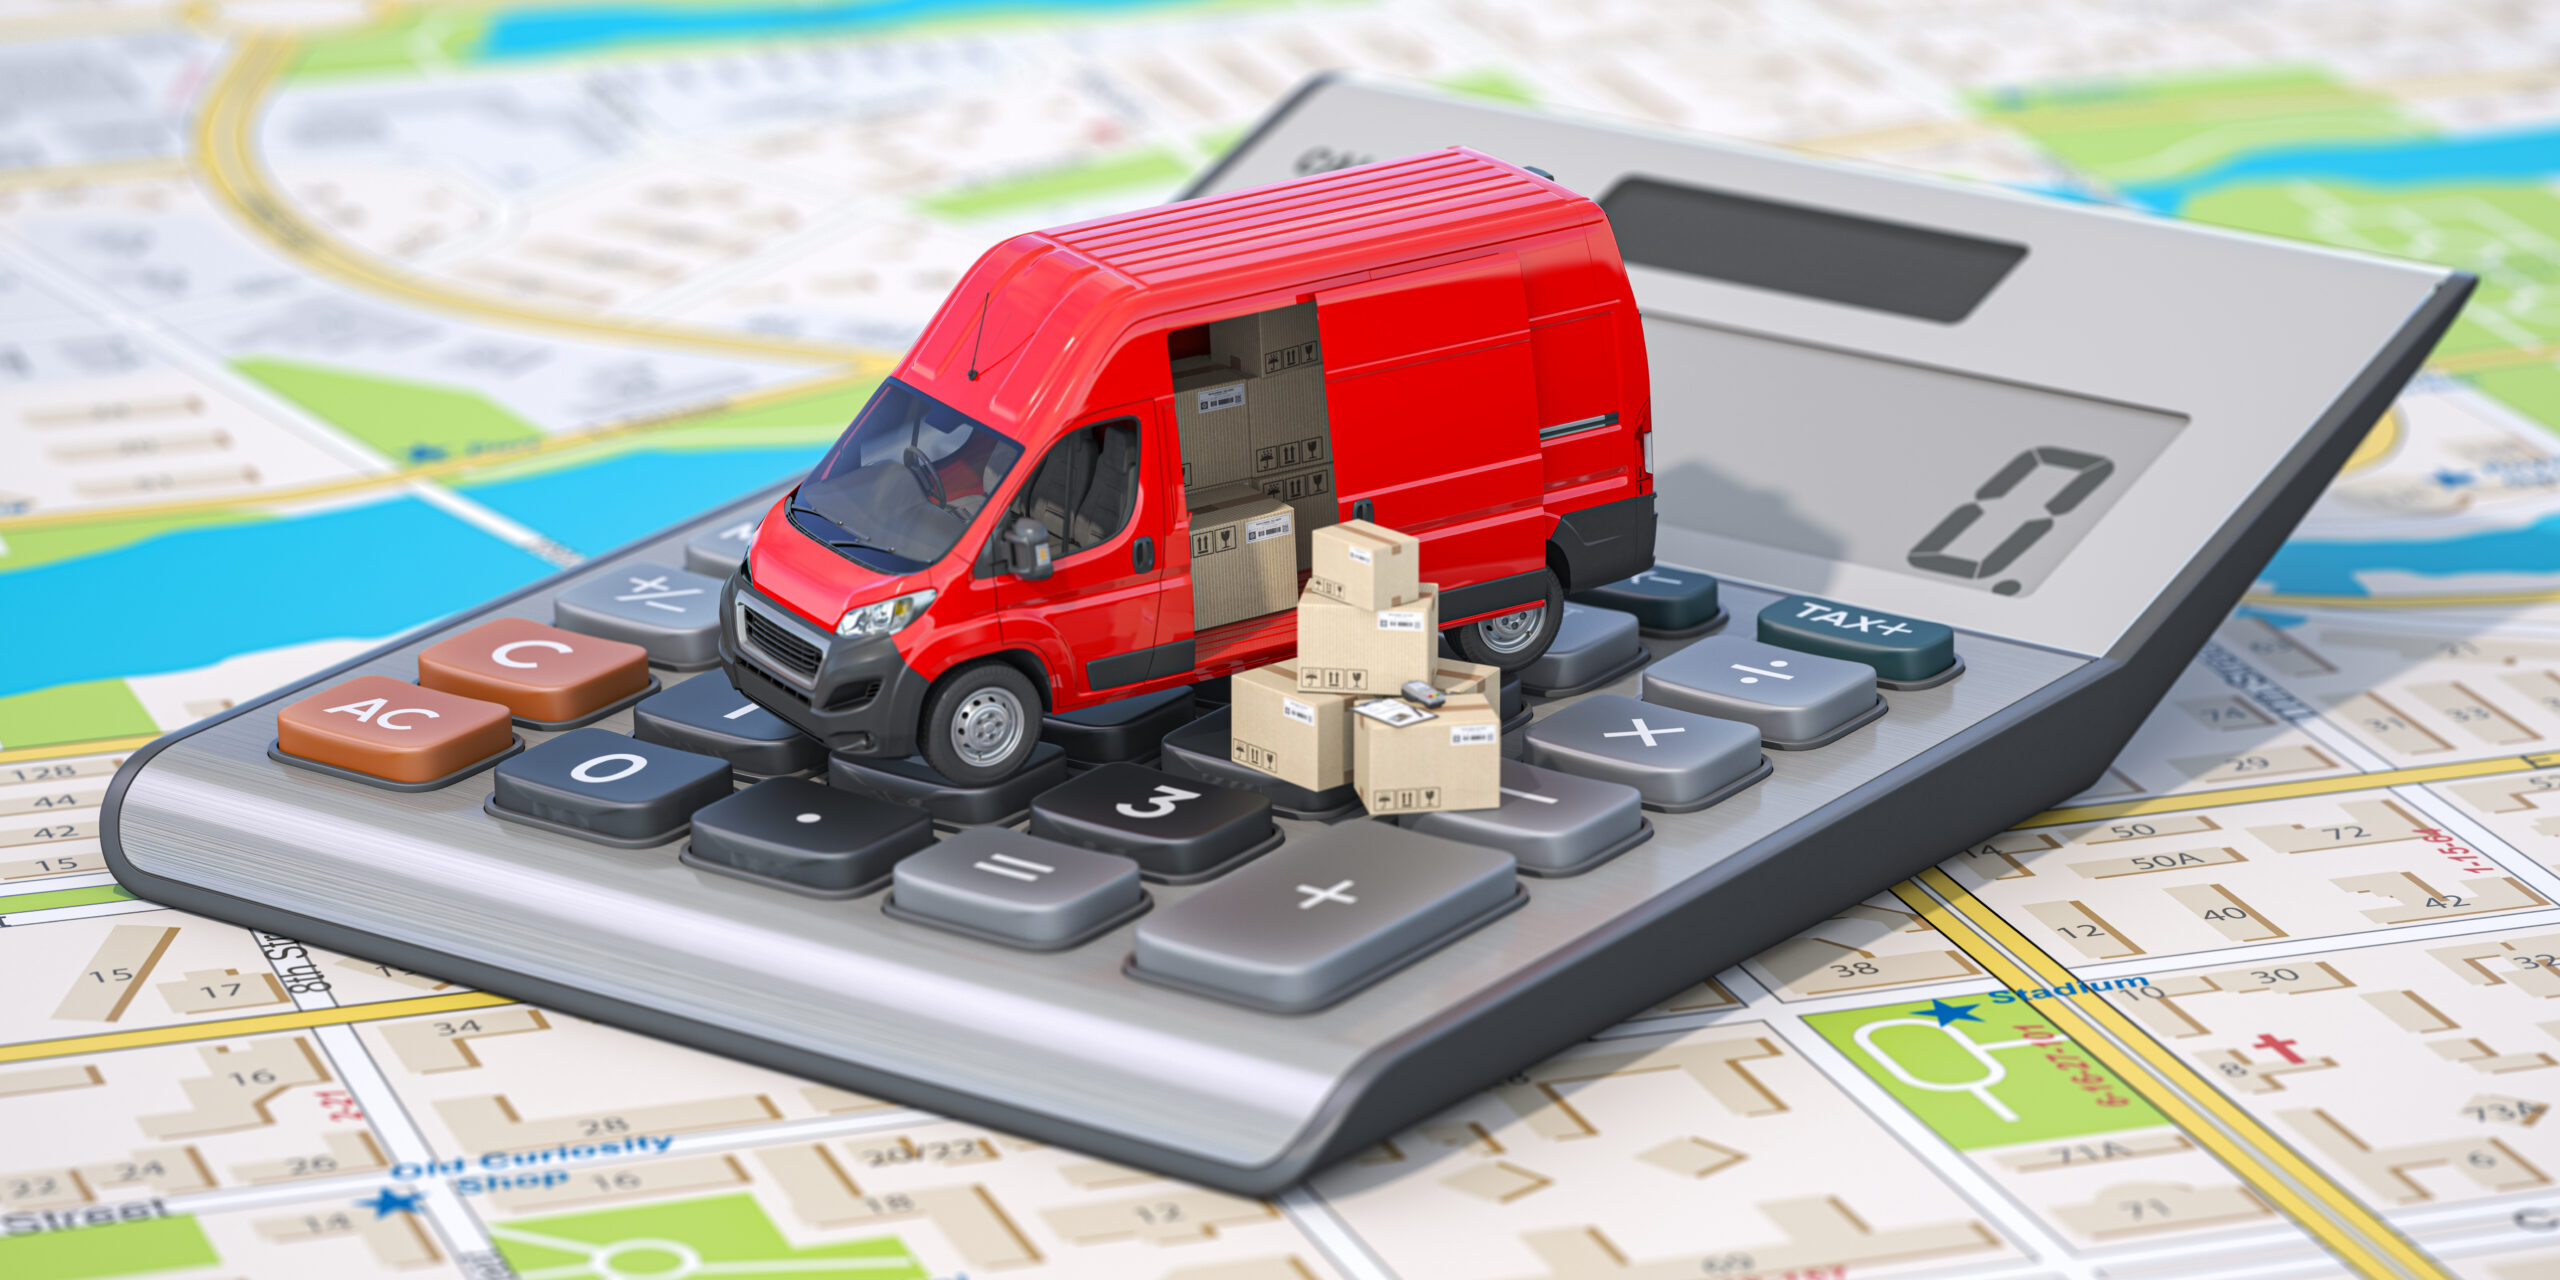 Last mile delivery costs concept - a 3d model of a delivery van is sitting on a calculator, which is on top of a map